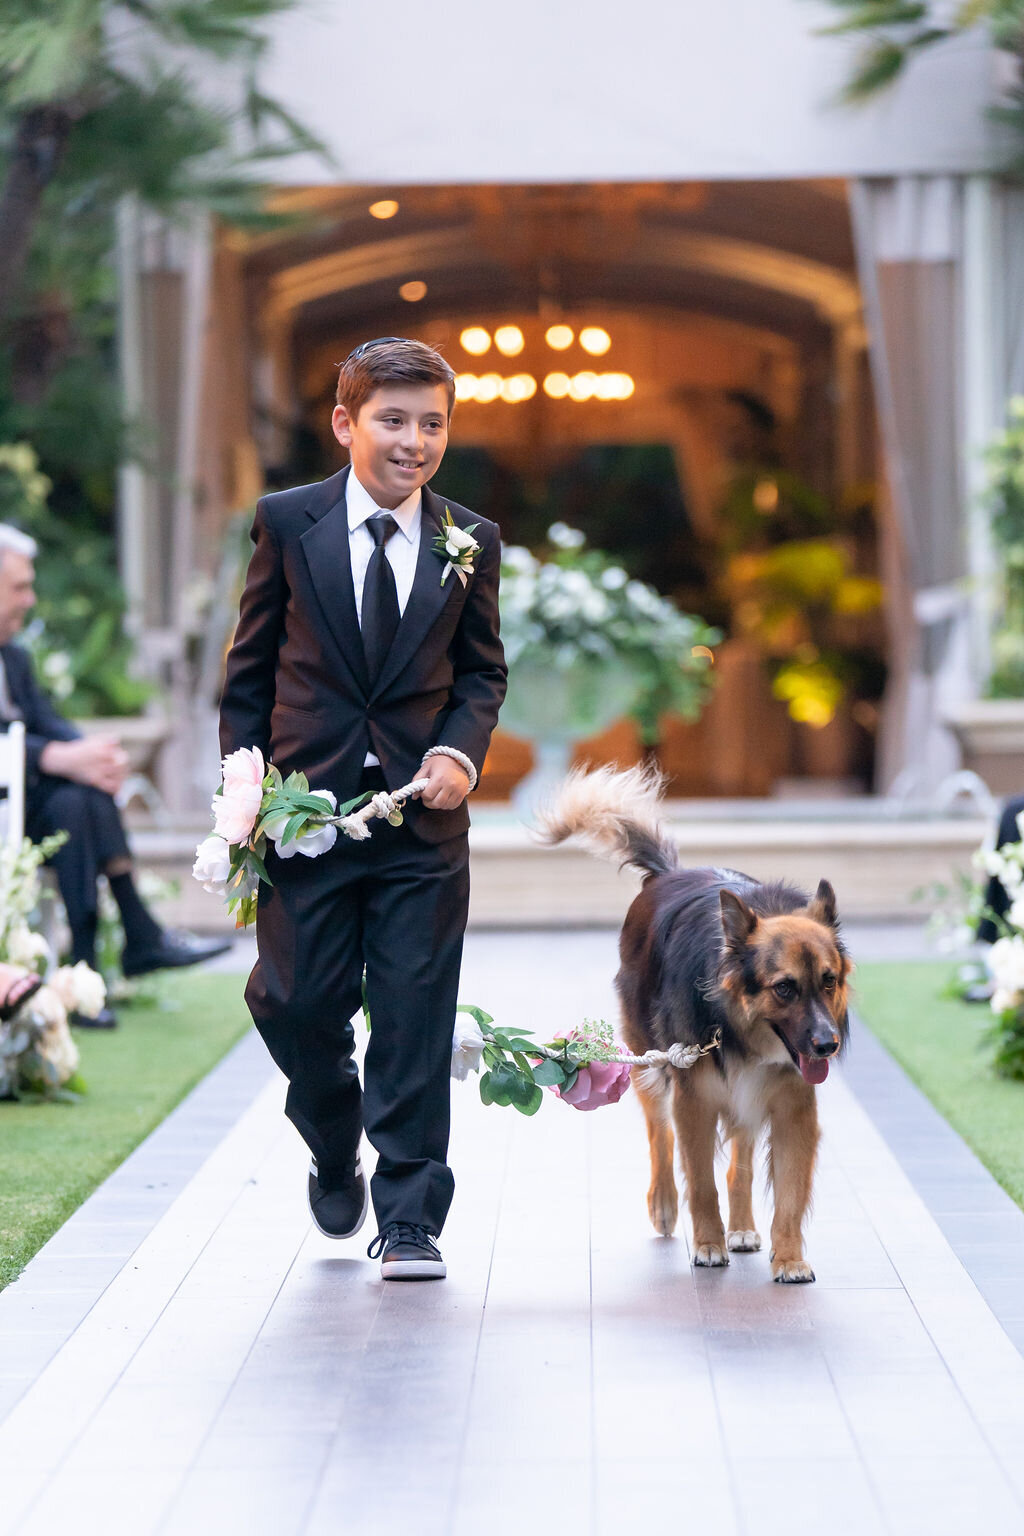 ring bearer walking in the couple's dog at ceremony